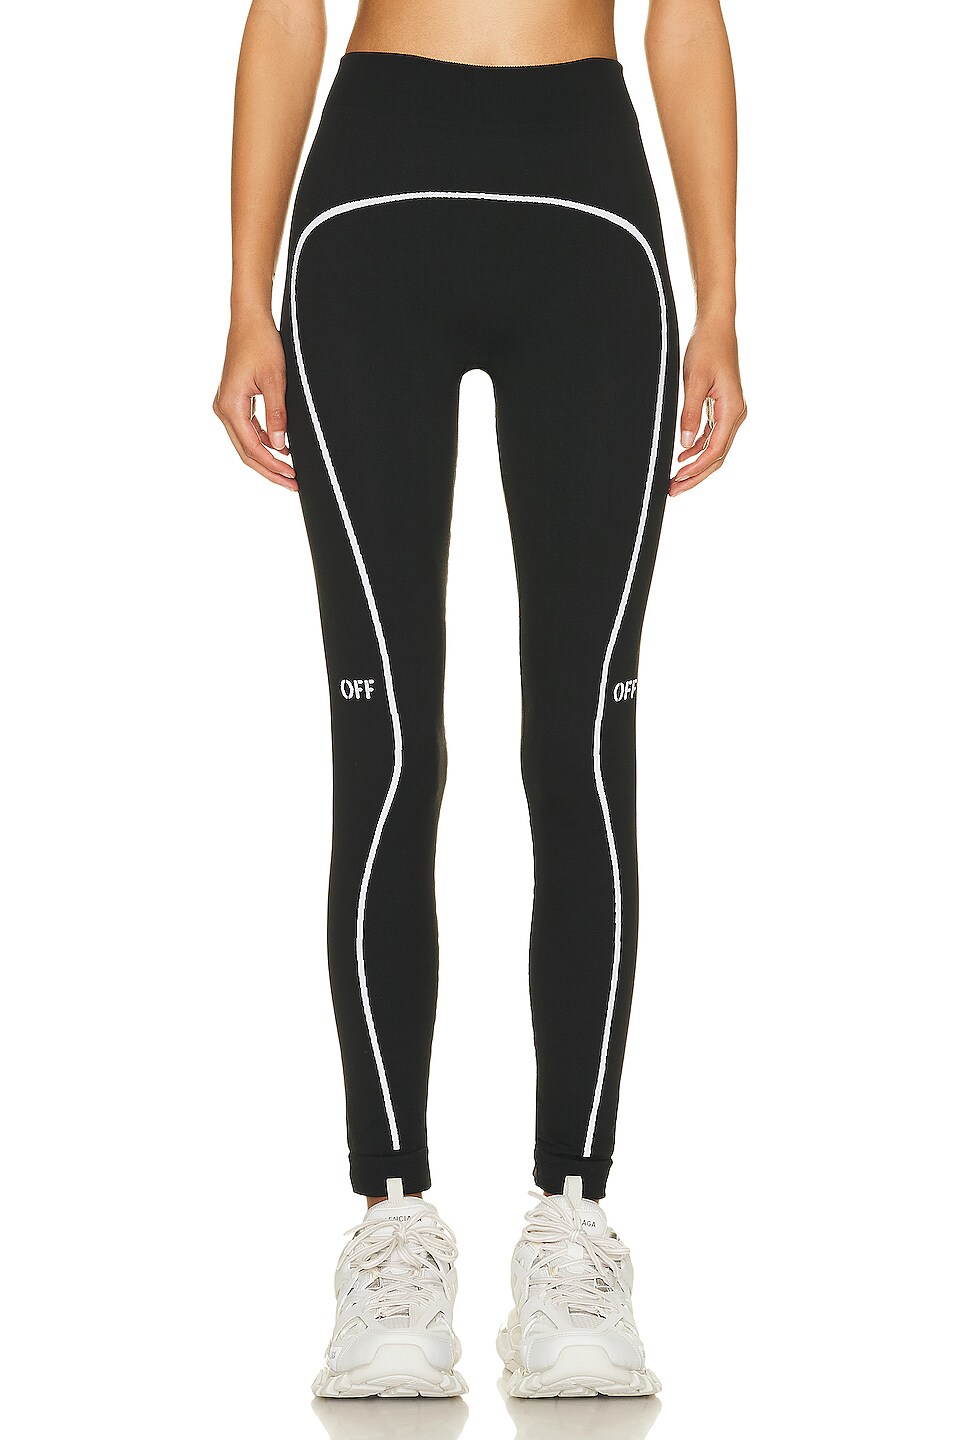 Image 1 of OFF-WHITE Athleisure Off Stamp Seamless Legging in Black & White